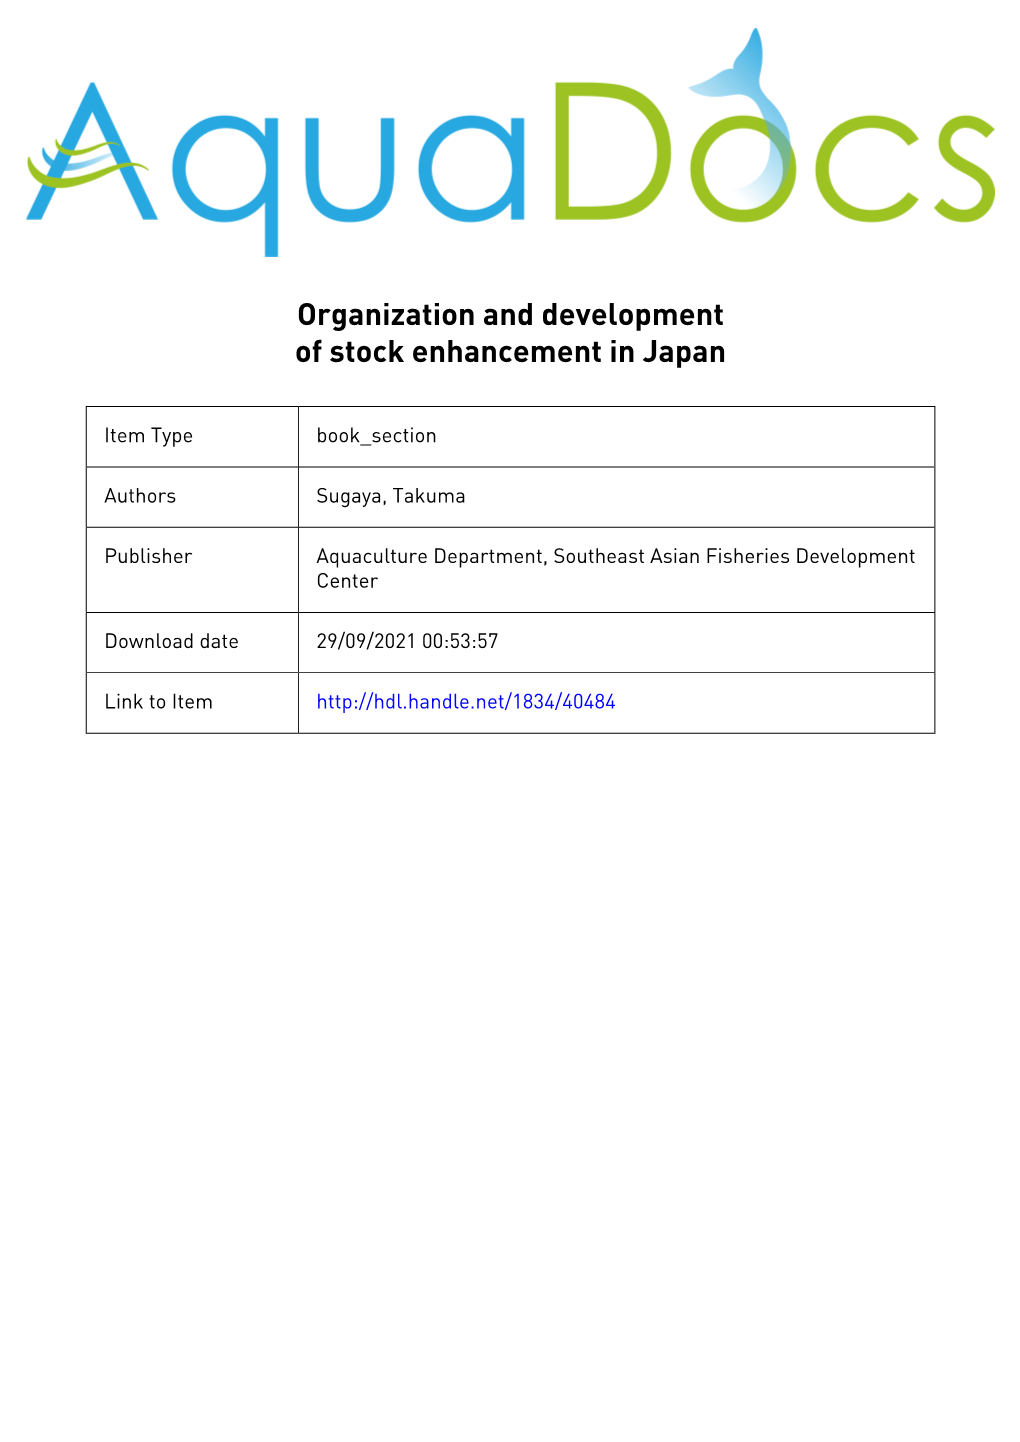 Organization and Development of Stock Enhancement in Japan